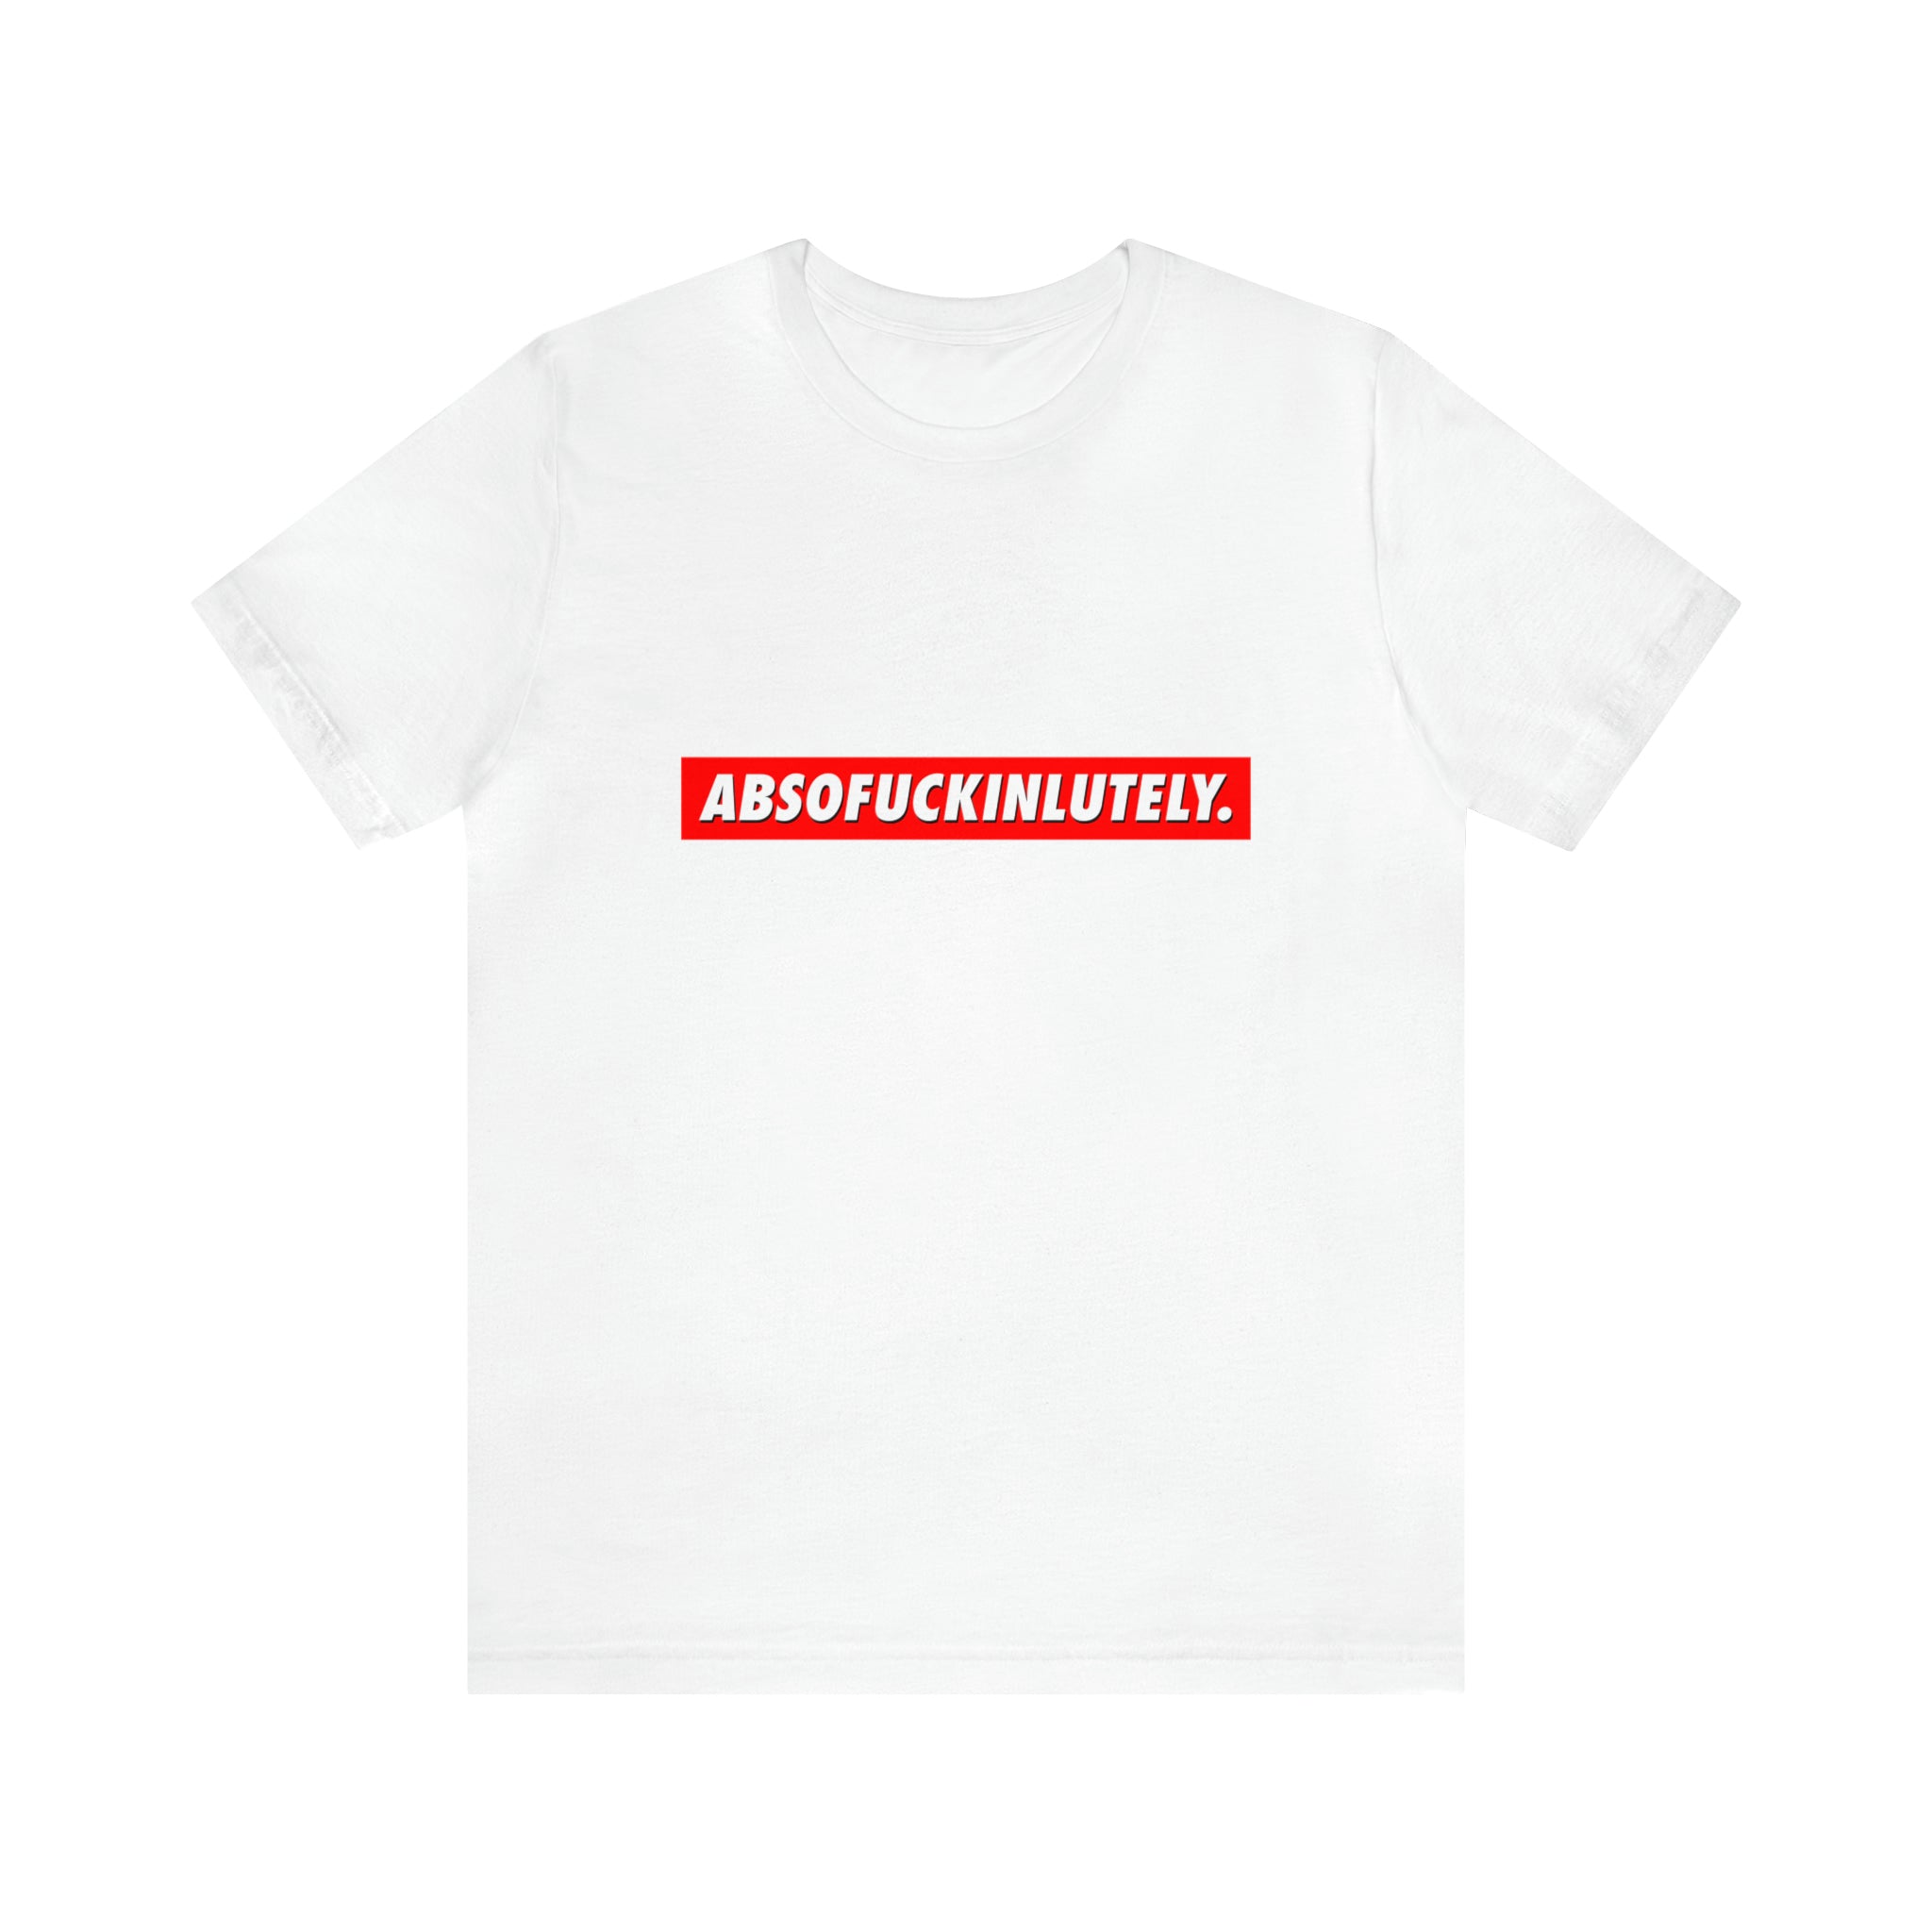 A white Absofuckinlutely T-Shirt with a red logo on it.